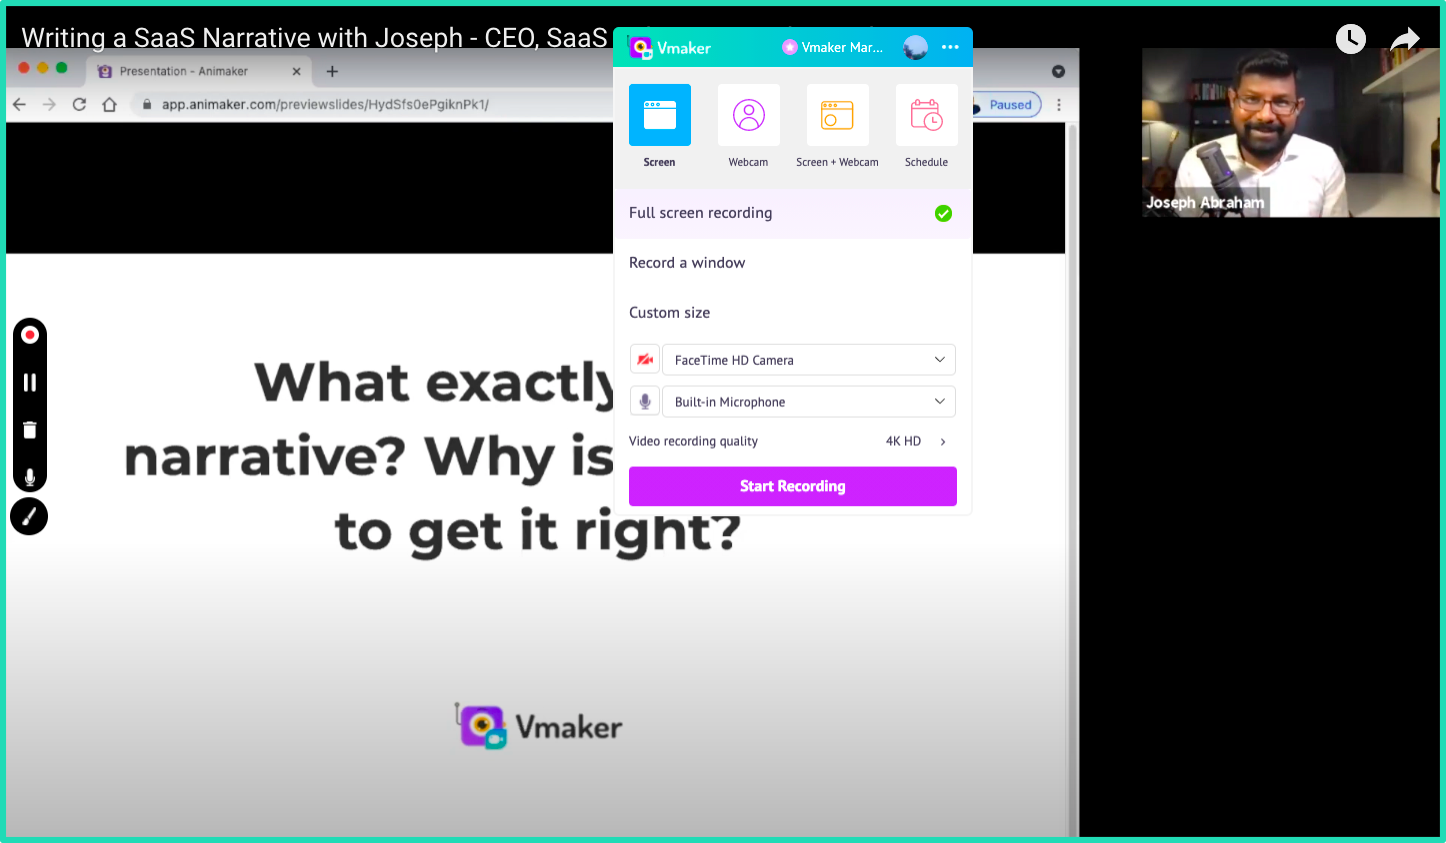 Learn how to record webinars using Vmaker for free